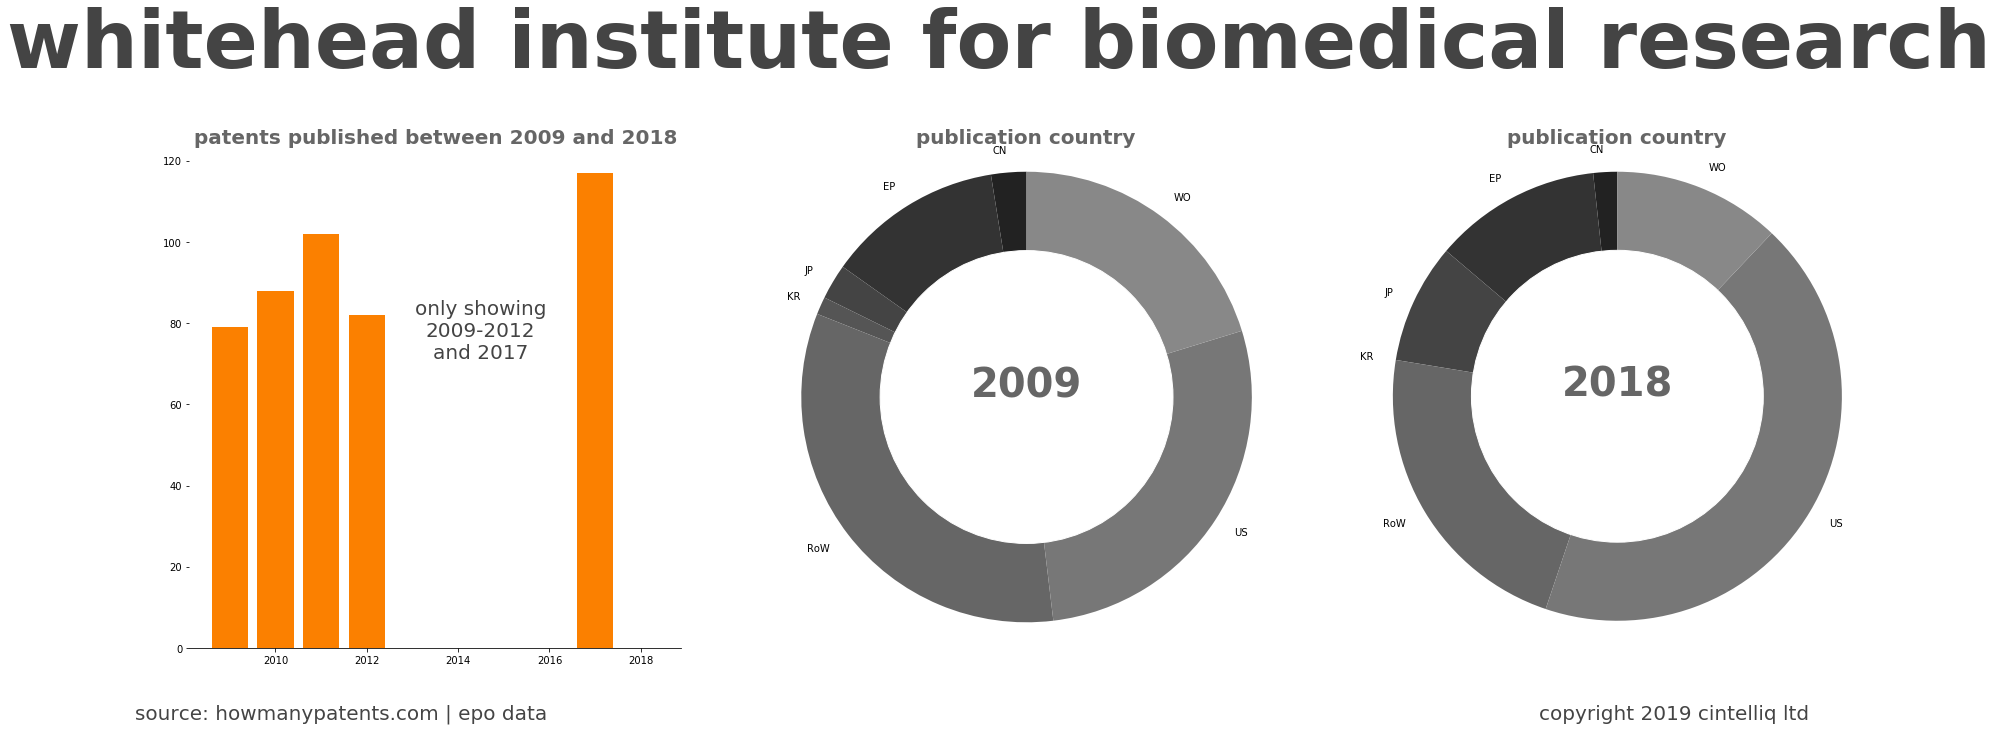 summary of patents for Whitehead Institute For Biomedical Research